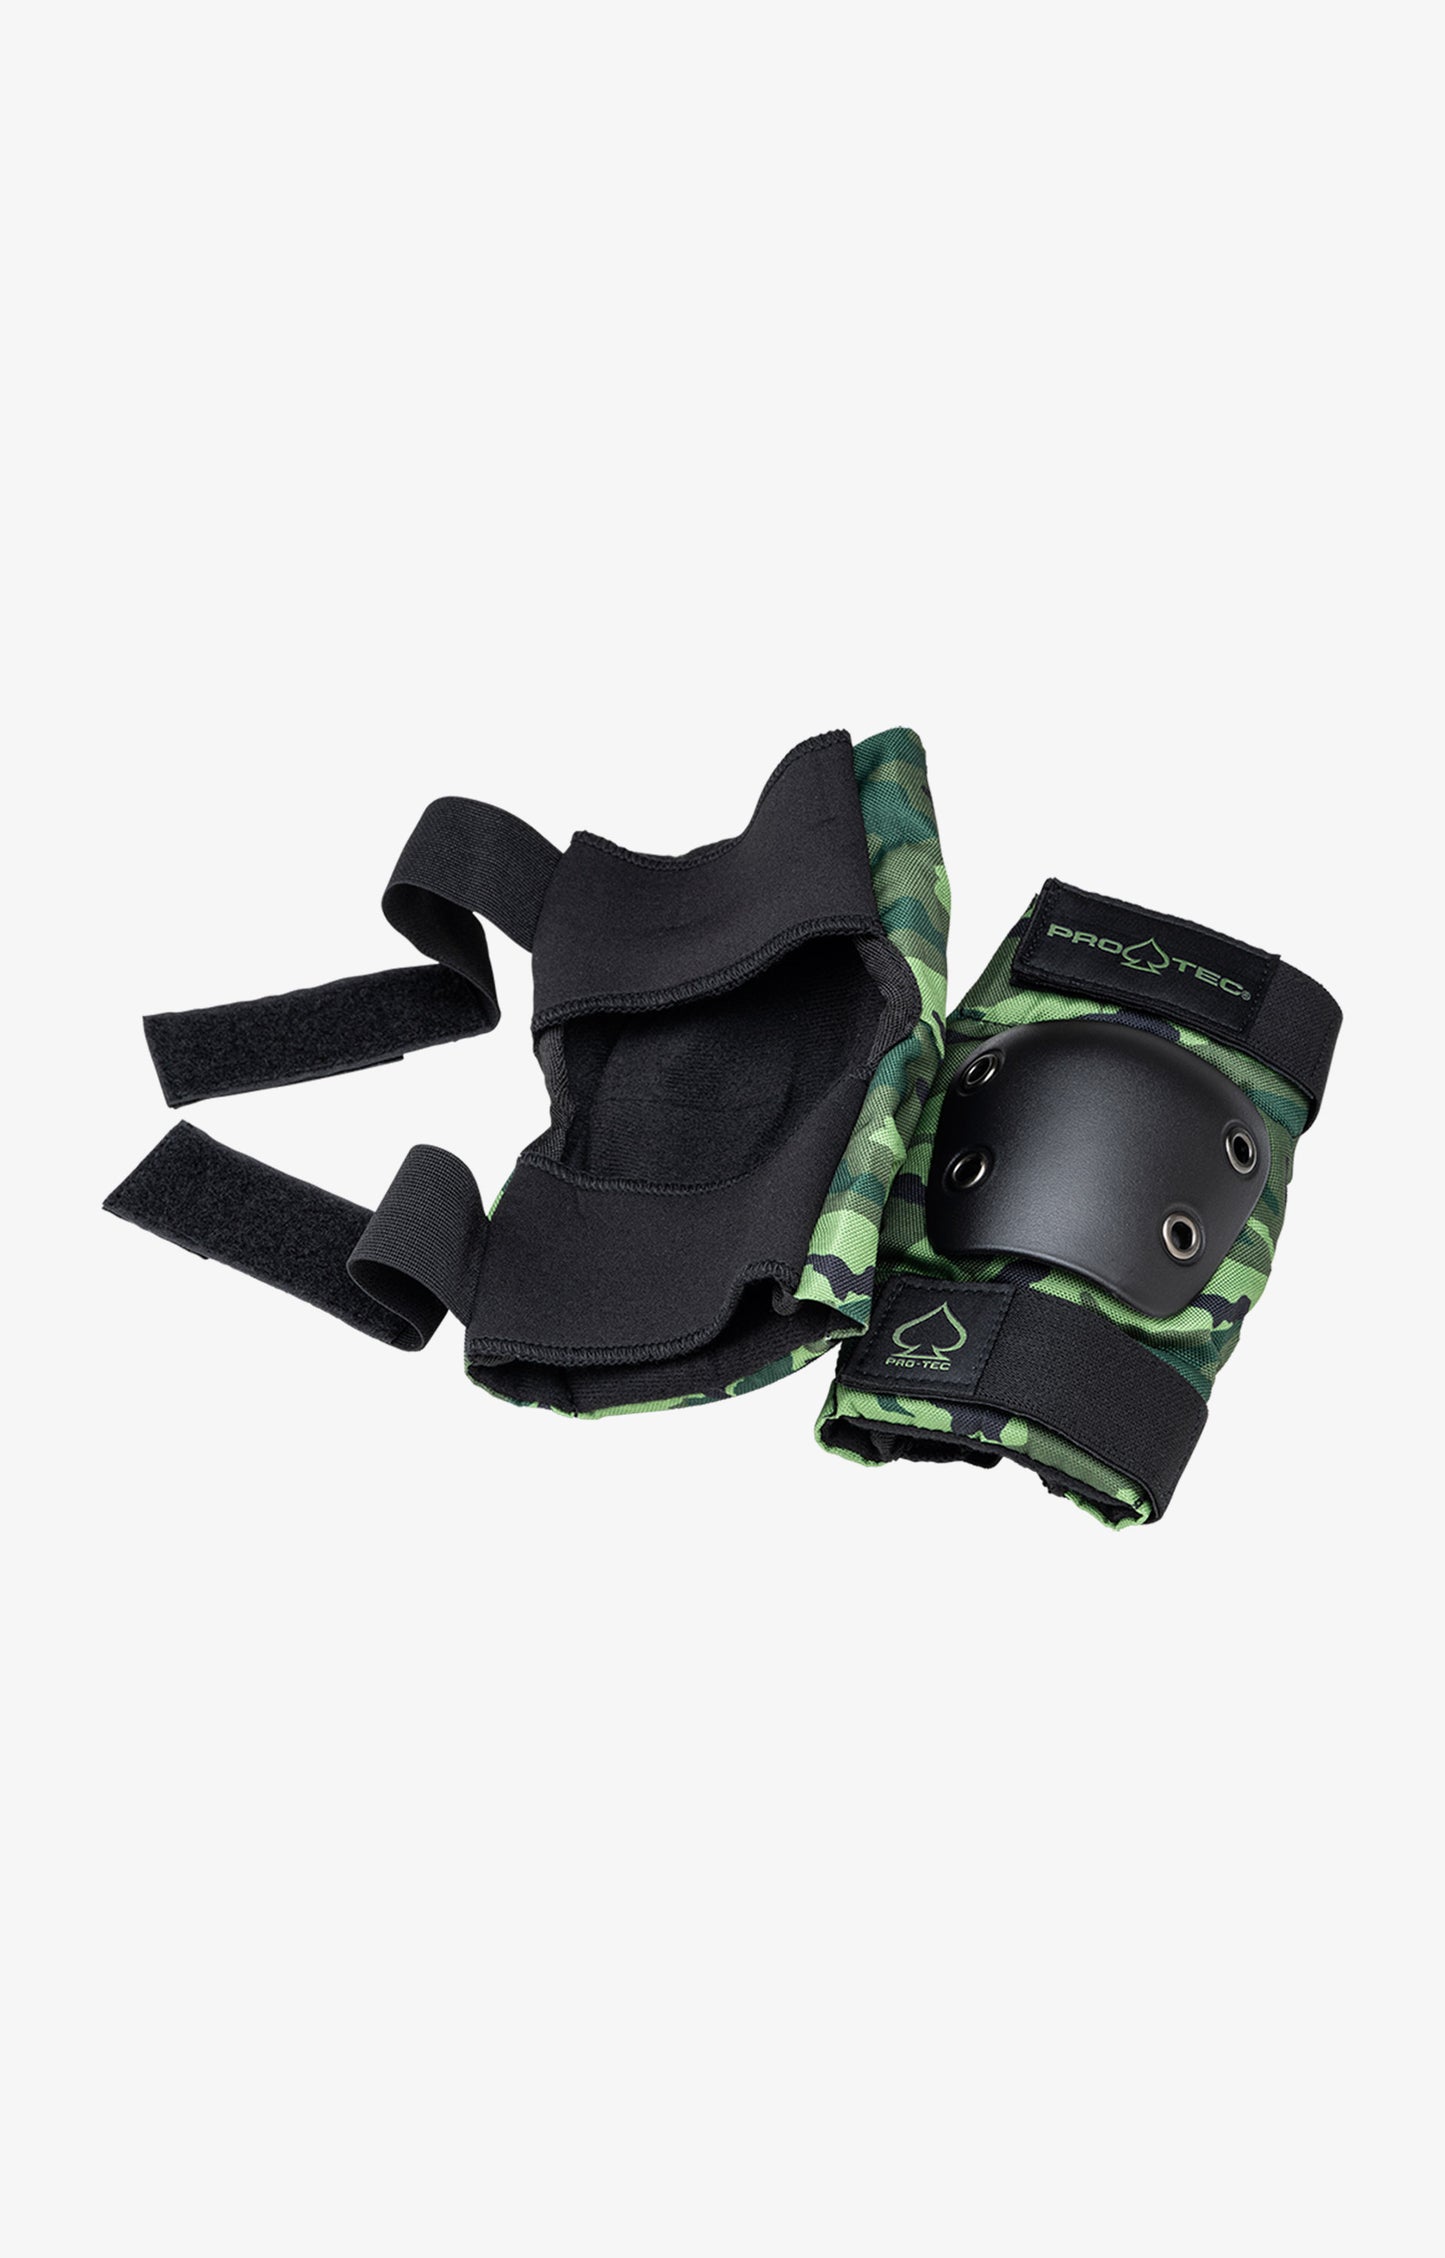 Pro-Tec Street Junior Protective 3 Pack Wrist Guards and Pads, Camo